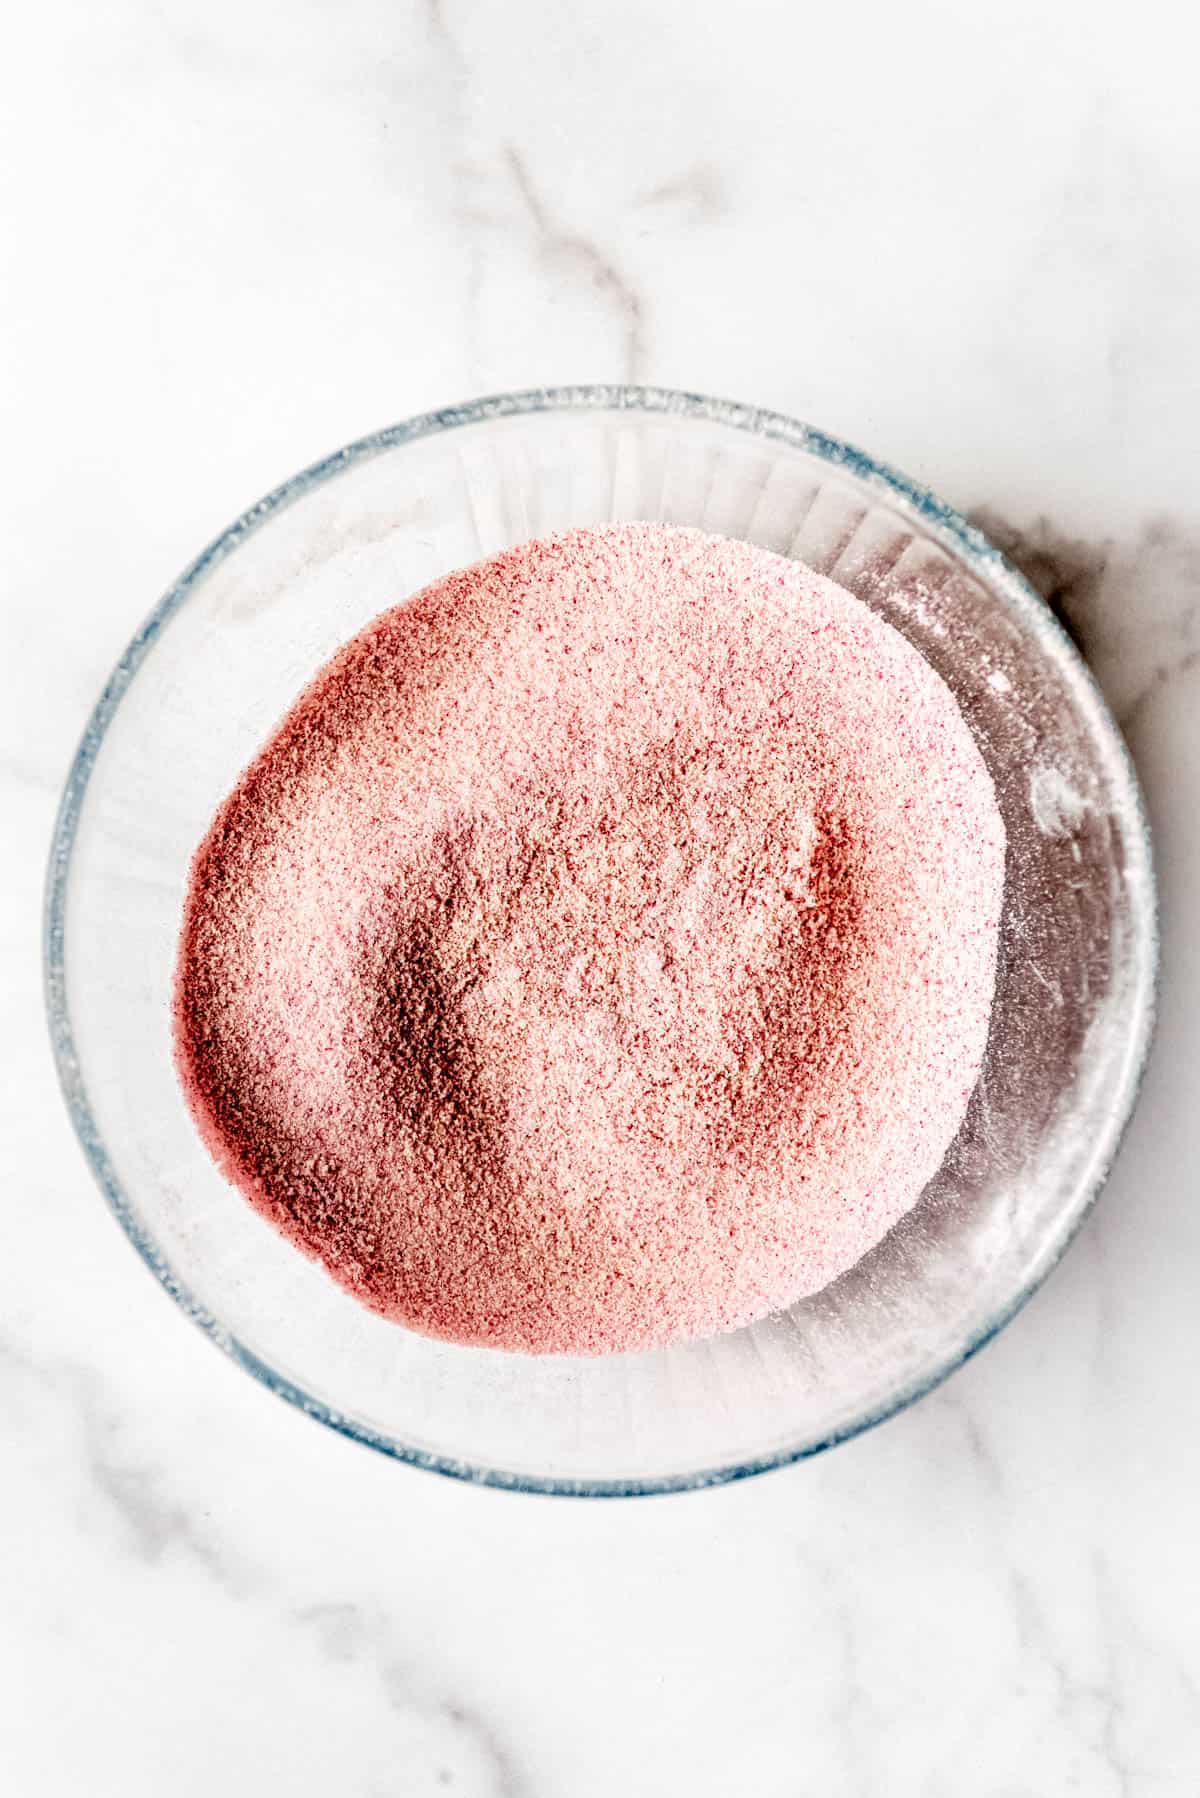 Powdered Ingredients for raspberry macarons sifted in bowl.